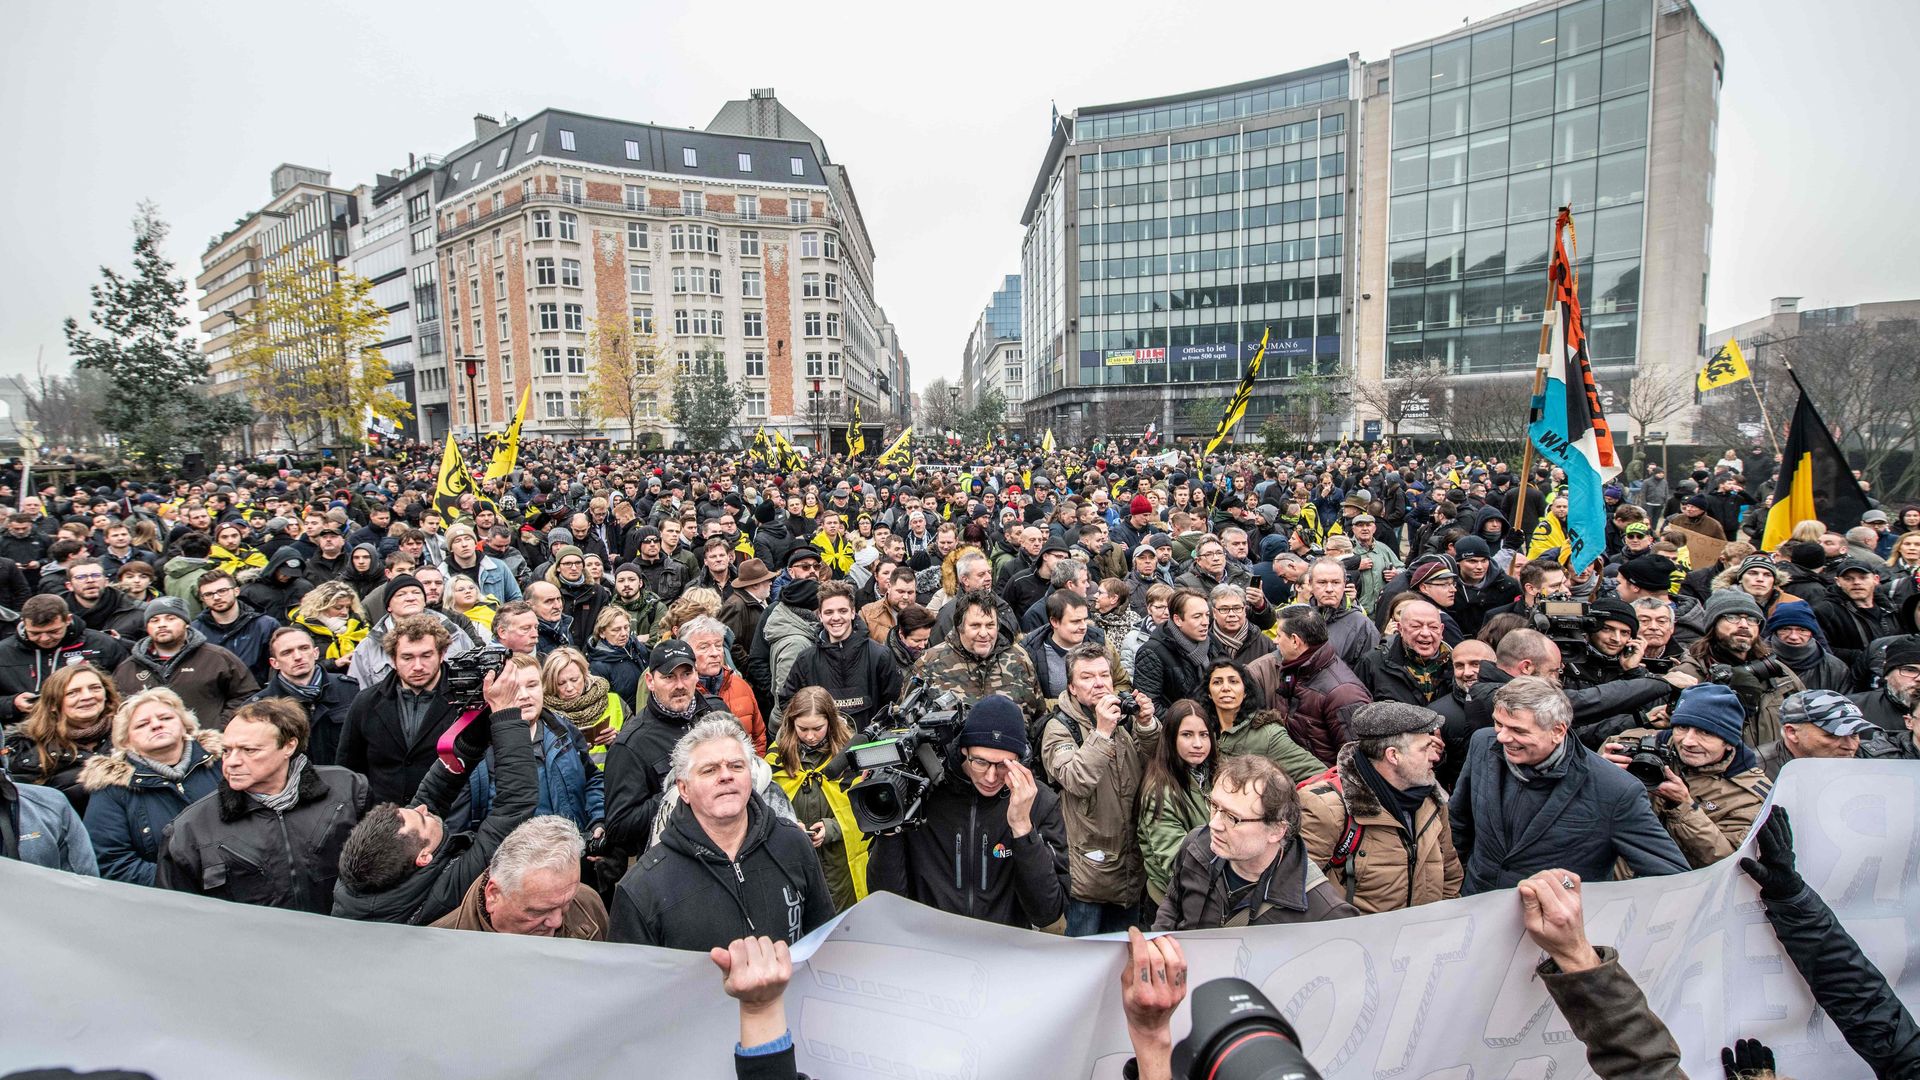 Protestors at a gathering called by the right-wing Flemish party Vlaams Belang and other organizations in Brussels against the UN Marrakech global pact on migration. 